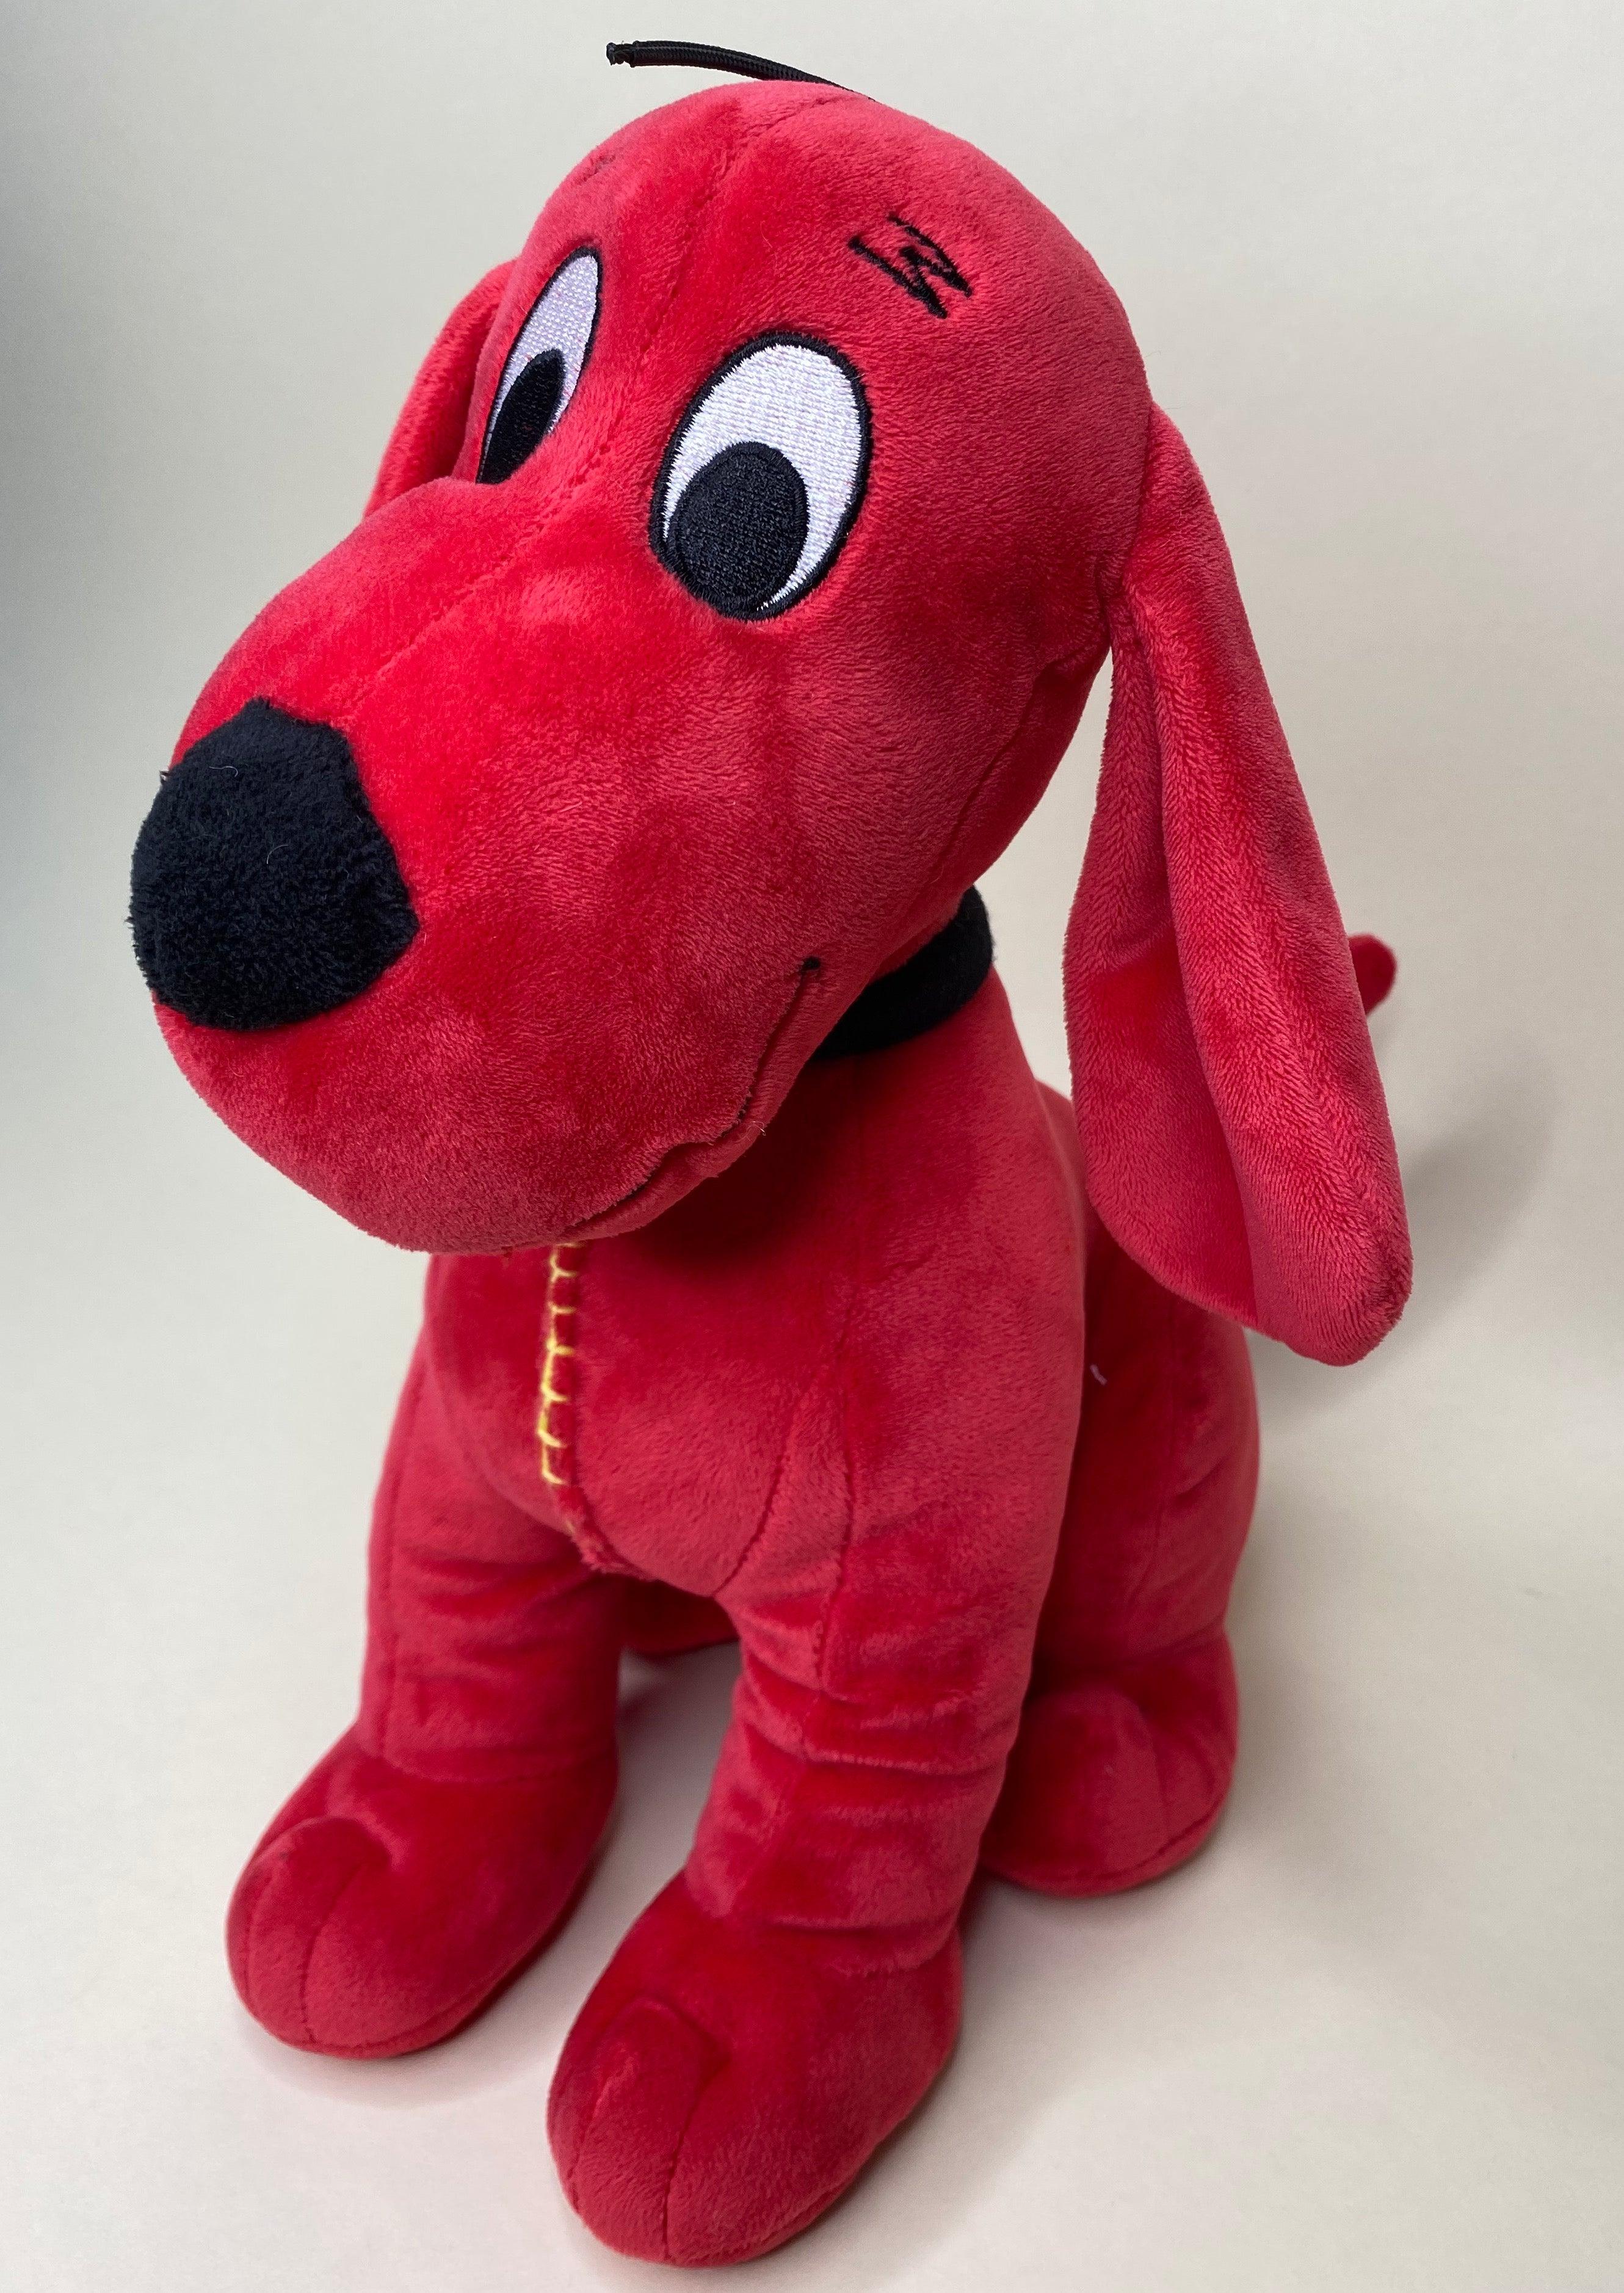 Large 'Toon Town Famous Character Squeaky Dog Toys: 11